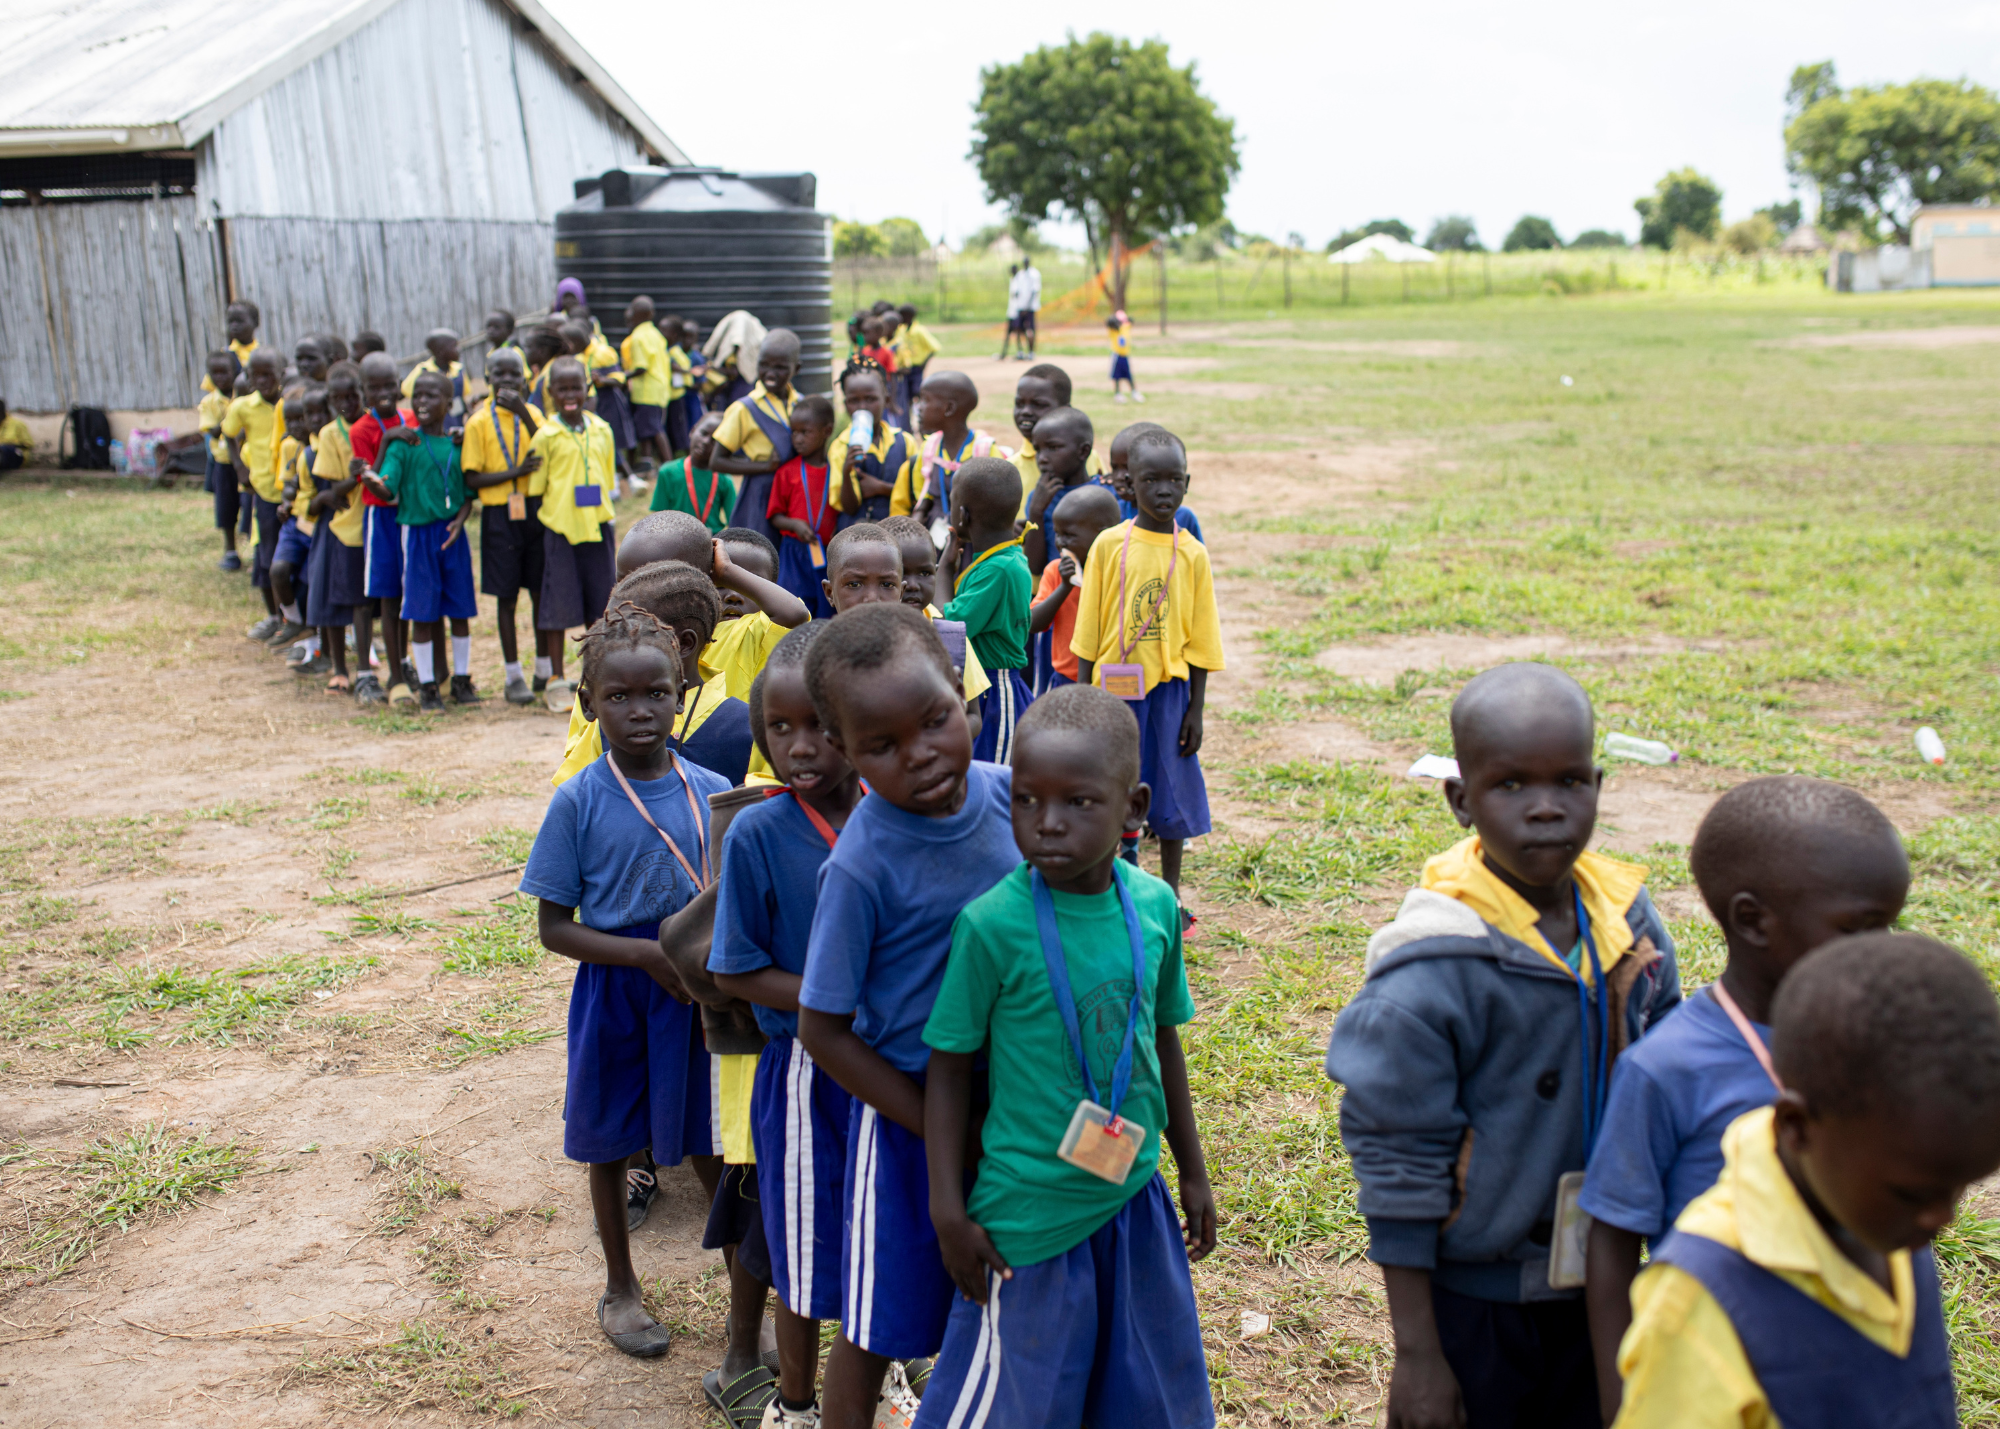 Feeding 1,000 children in South Sudan through partnership with Convoy of Hope and others!